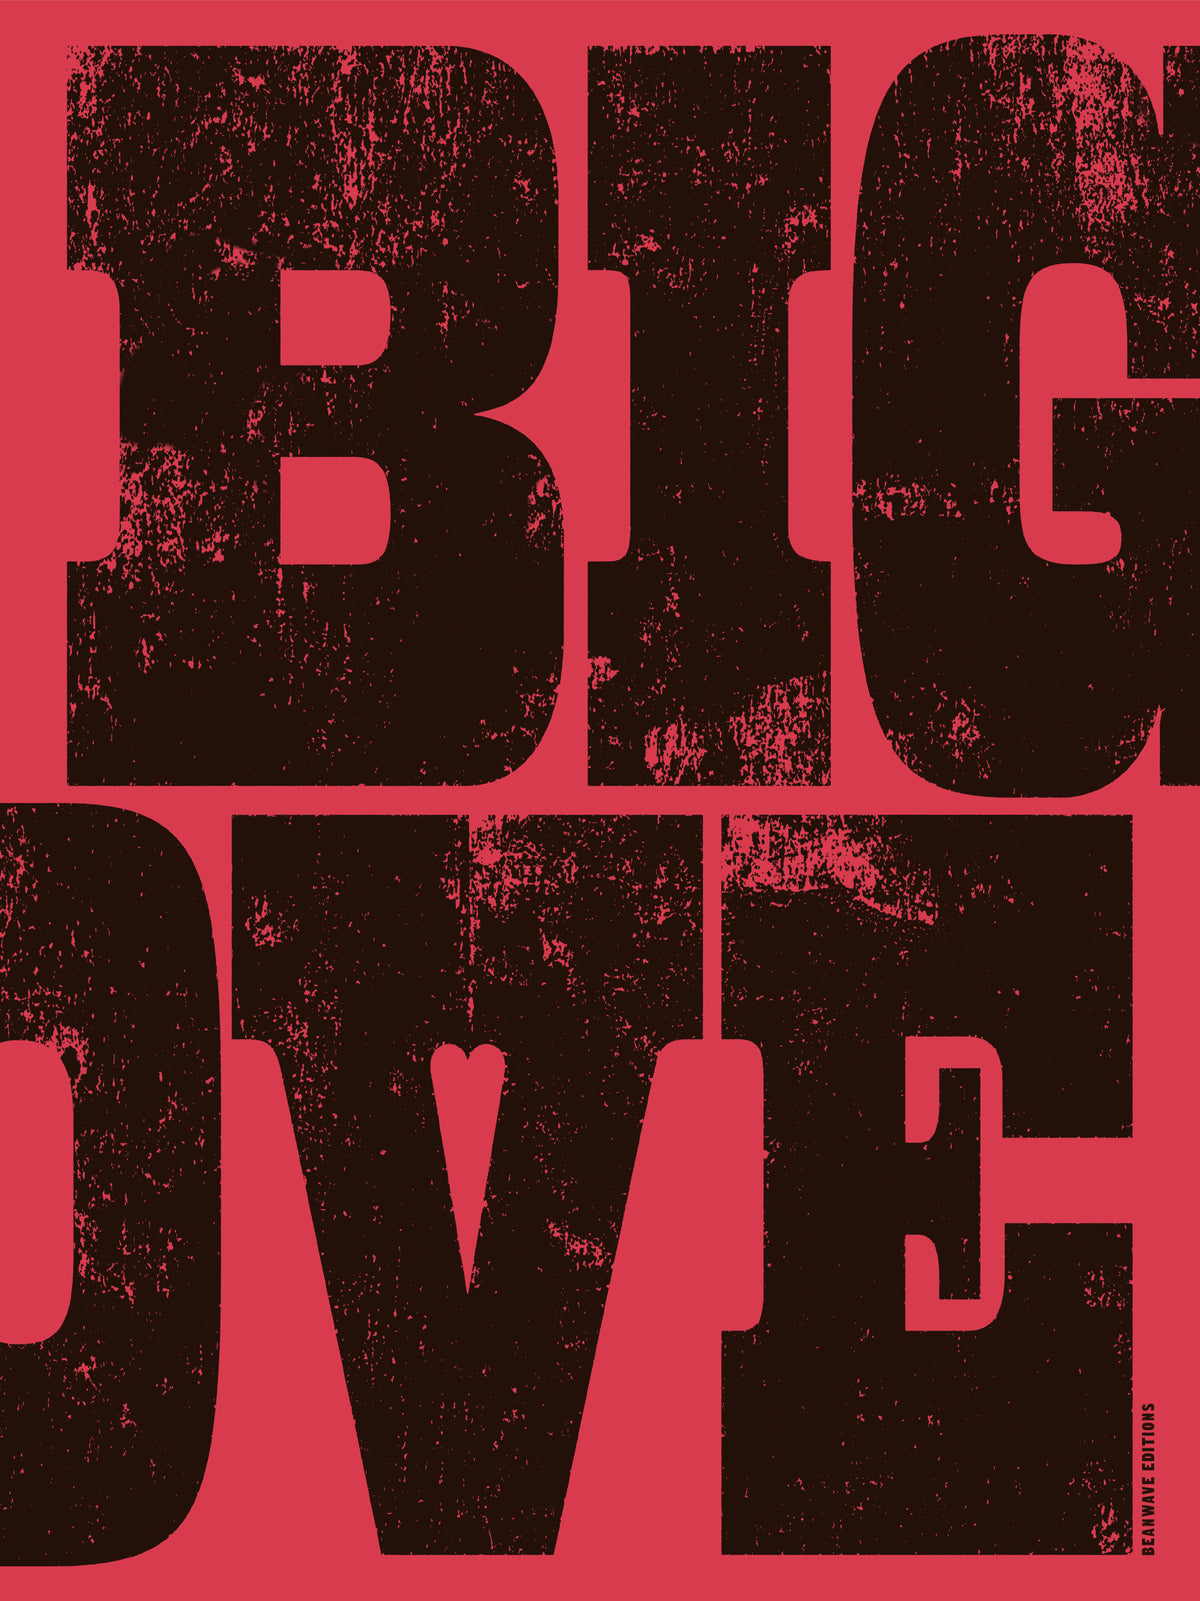 Big Love-Hot Pink by Beanwave Editions